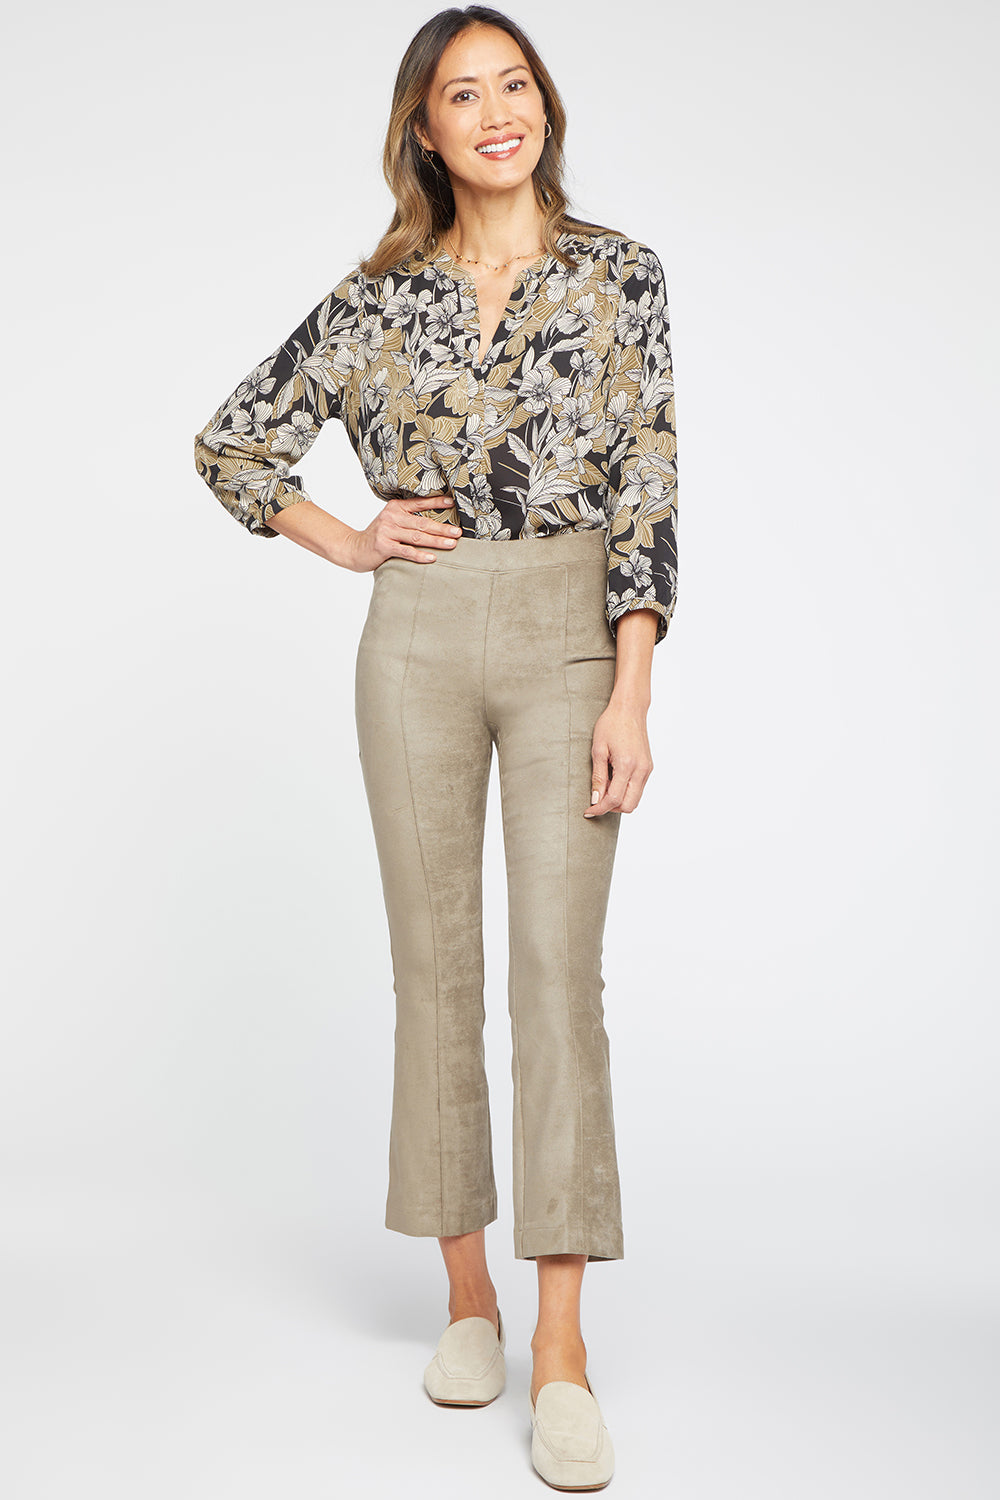 NYDJ Slim Bootcut Pull-On Pants In Stretch Faux Suede - Saddlewood